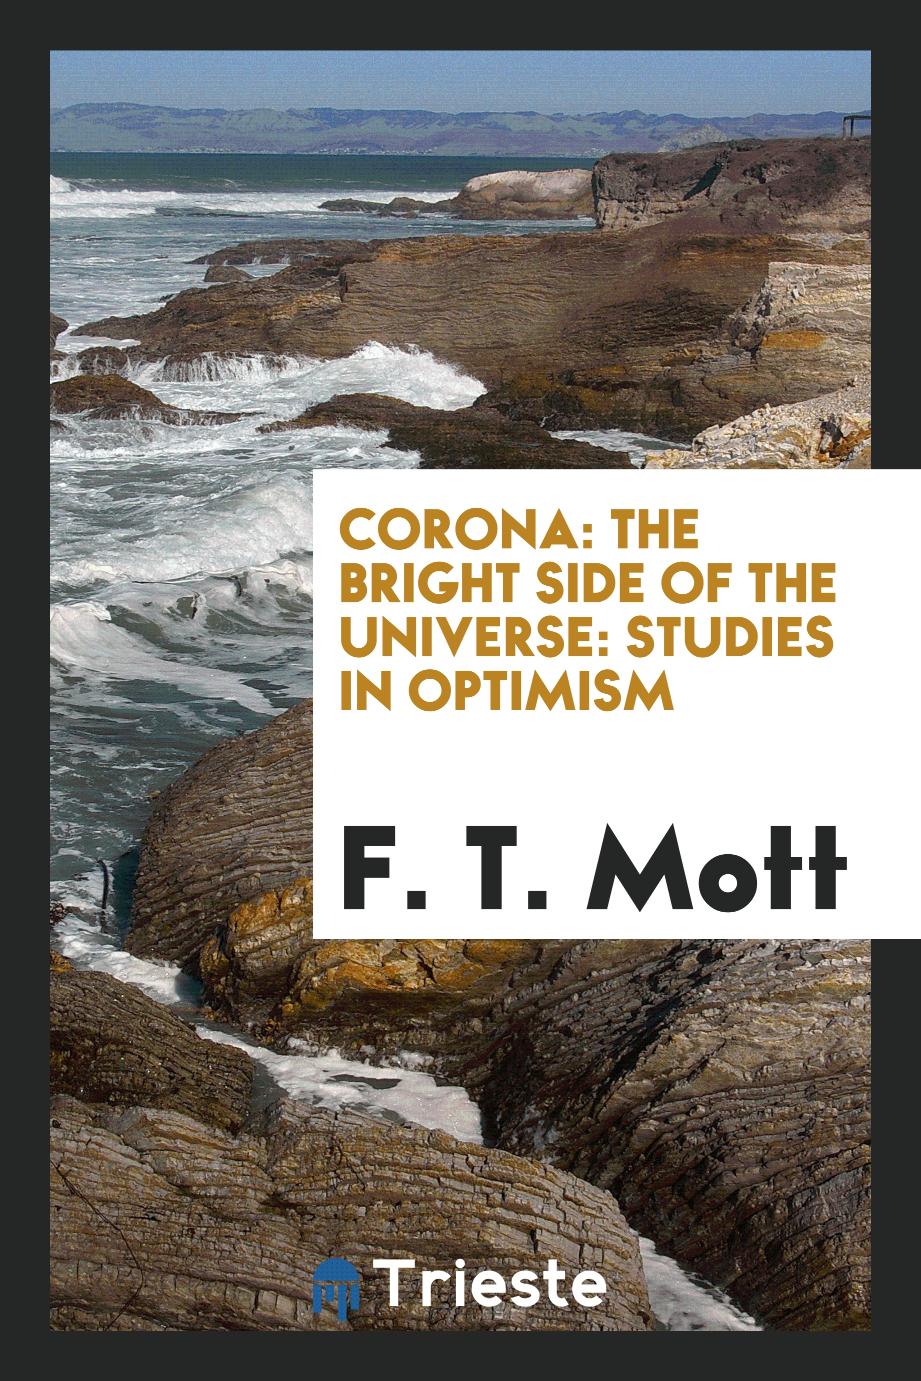 Corona: The Bright Side of the Universe: Studies in Optimism